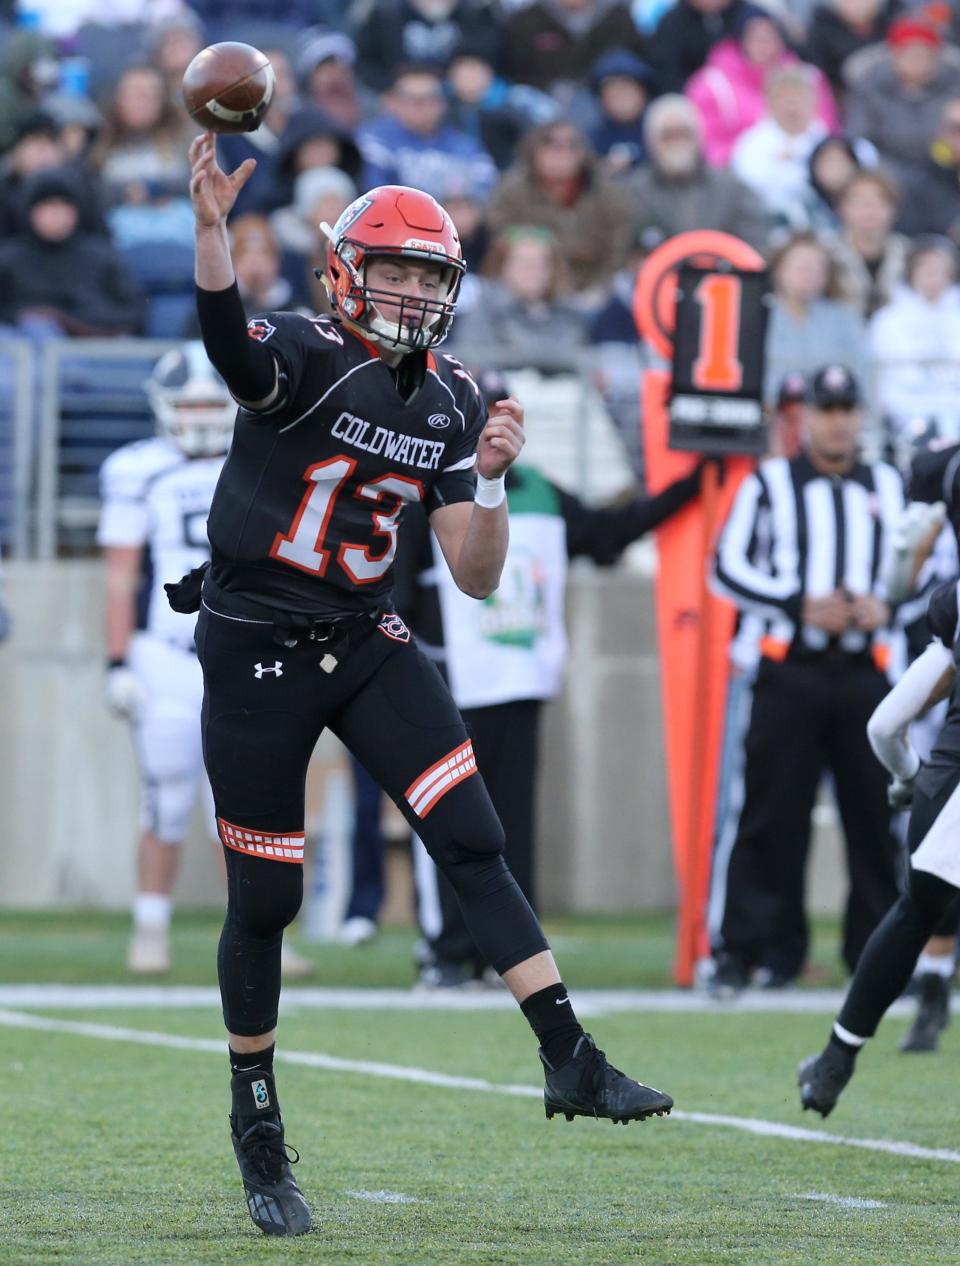 Reece Dellinger of Coldwater targets a receiver during their DVI state championship game against Carey at Tom Benson Hall of Fame Stadium on Saturday, Dec. 4, 2021.